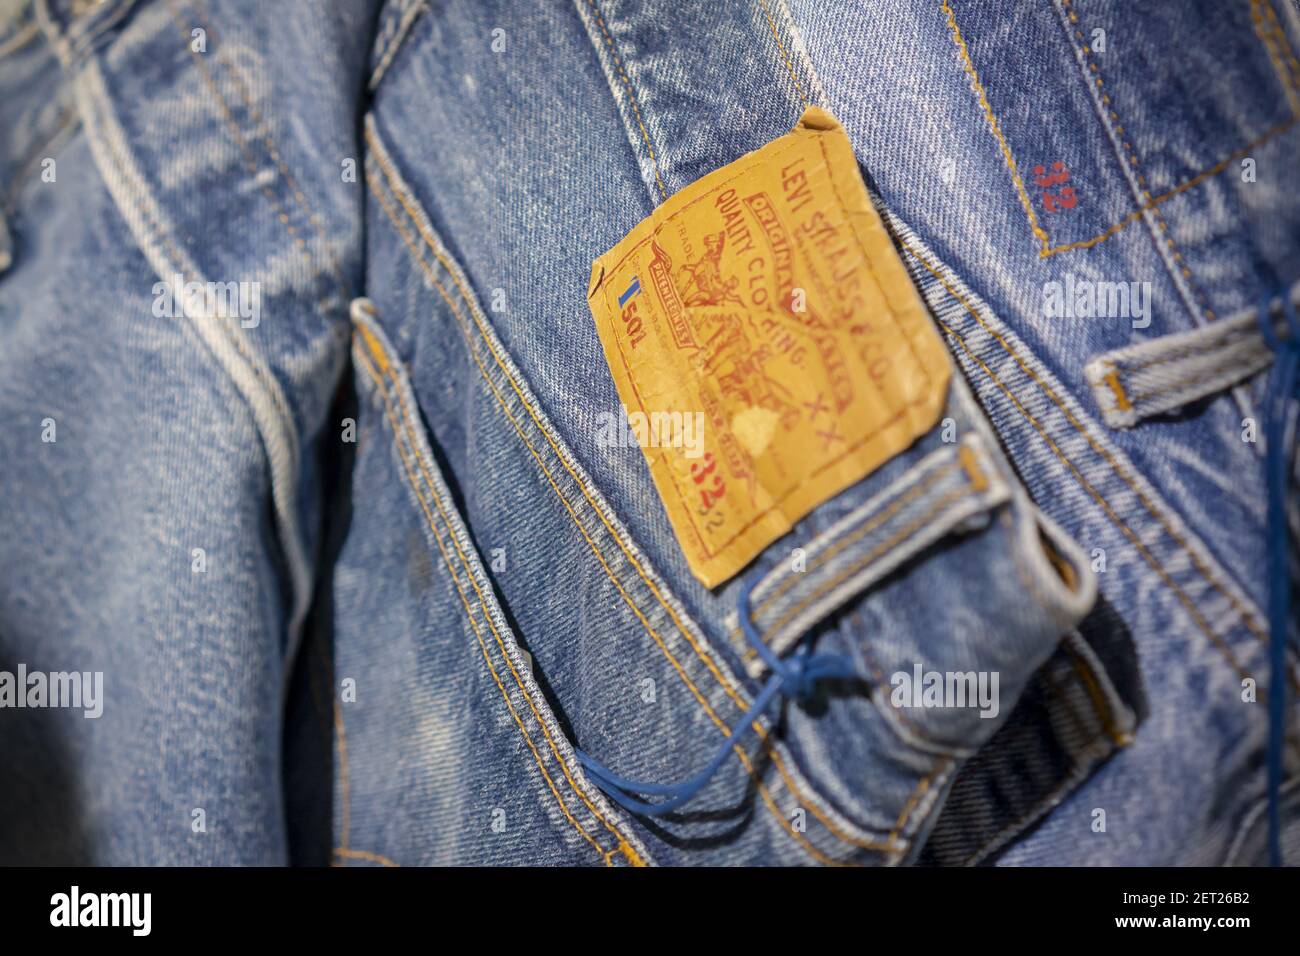 Vintage 501 jeans in the Levi Strauss and Co.'s new flagship store in Times  Square in New York on its grand opening day, Friday, November 16, 2018. The  king of blue jeans,